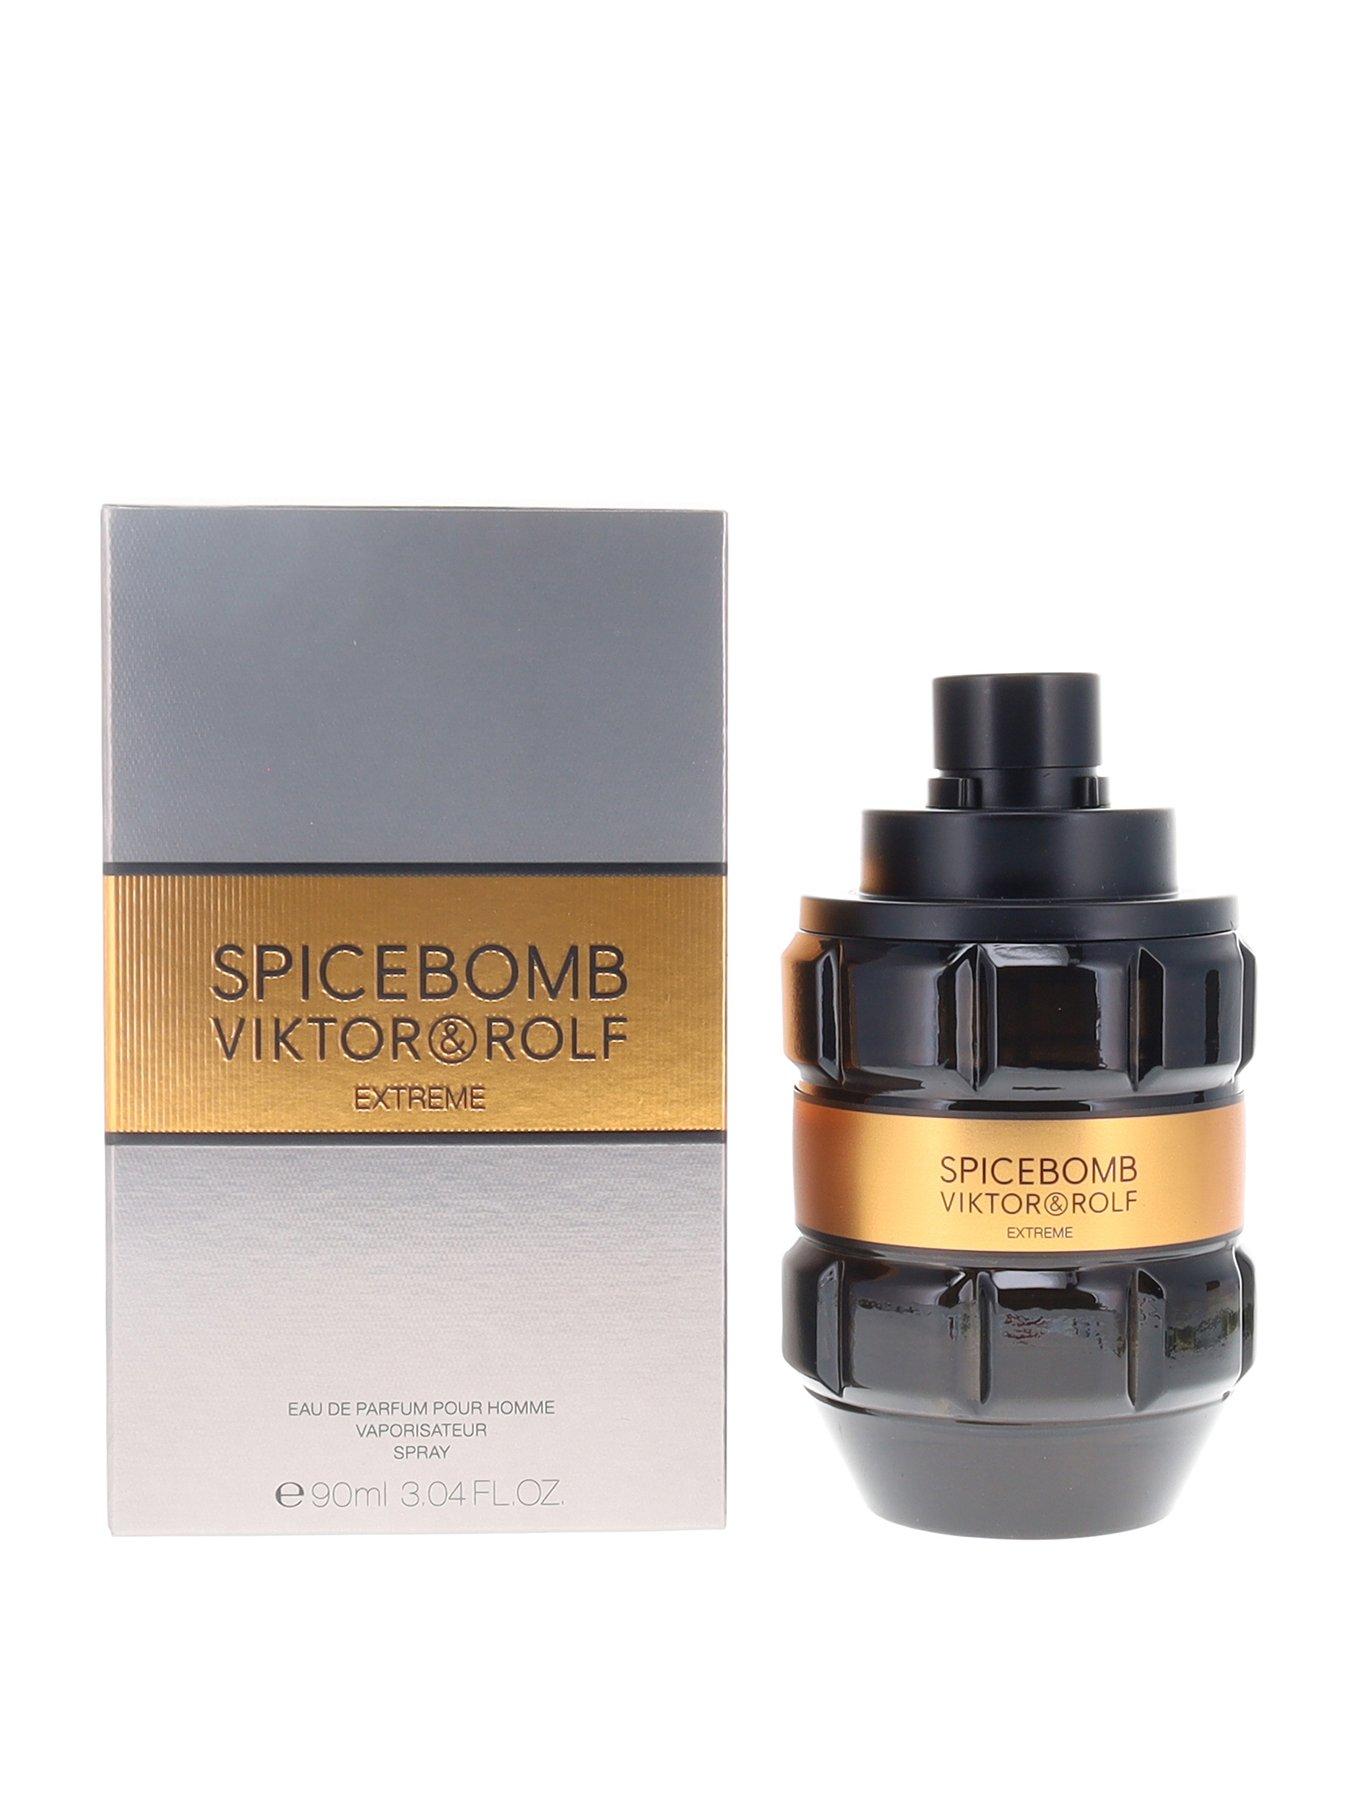 SPICEBOMB EXTREME REVIEW! THE COMPLIMENT GETTER FRAGRANCE FROM VIKTOR & ROLF!  